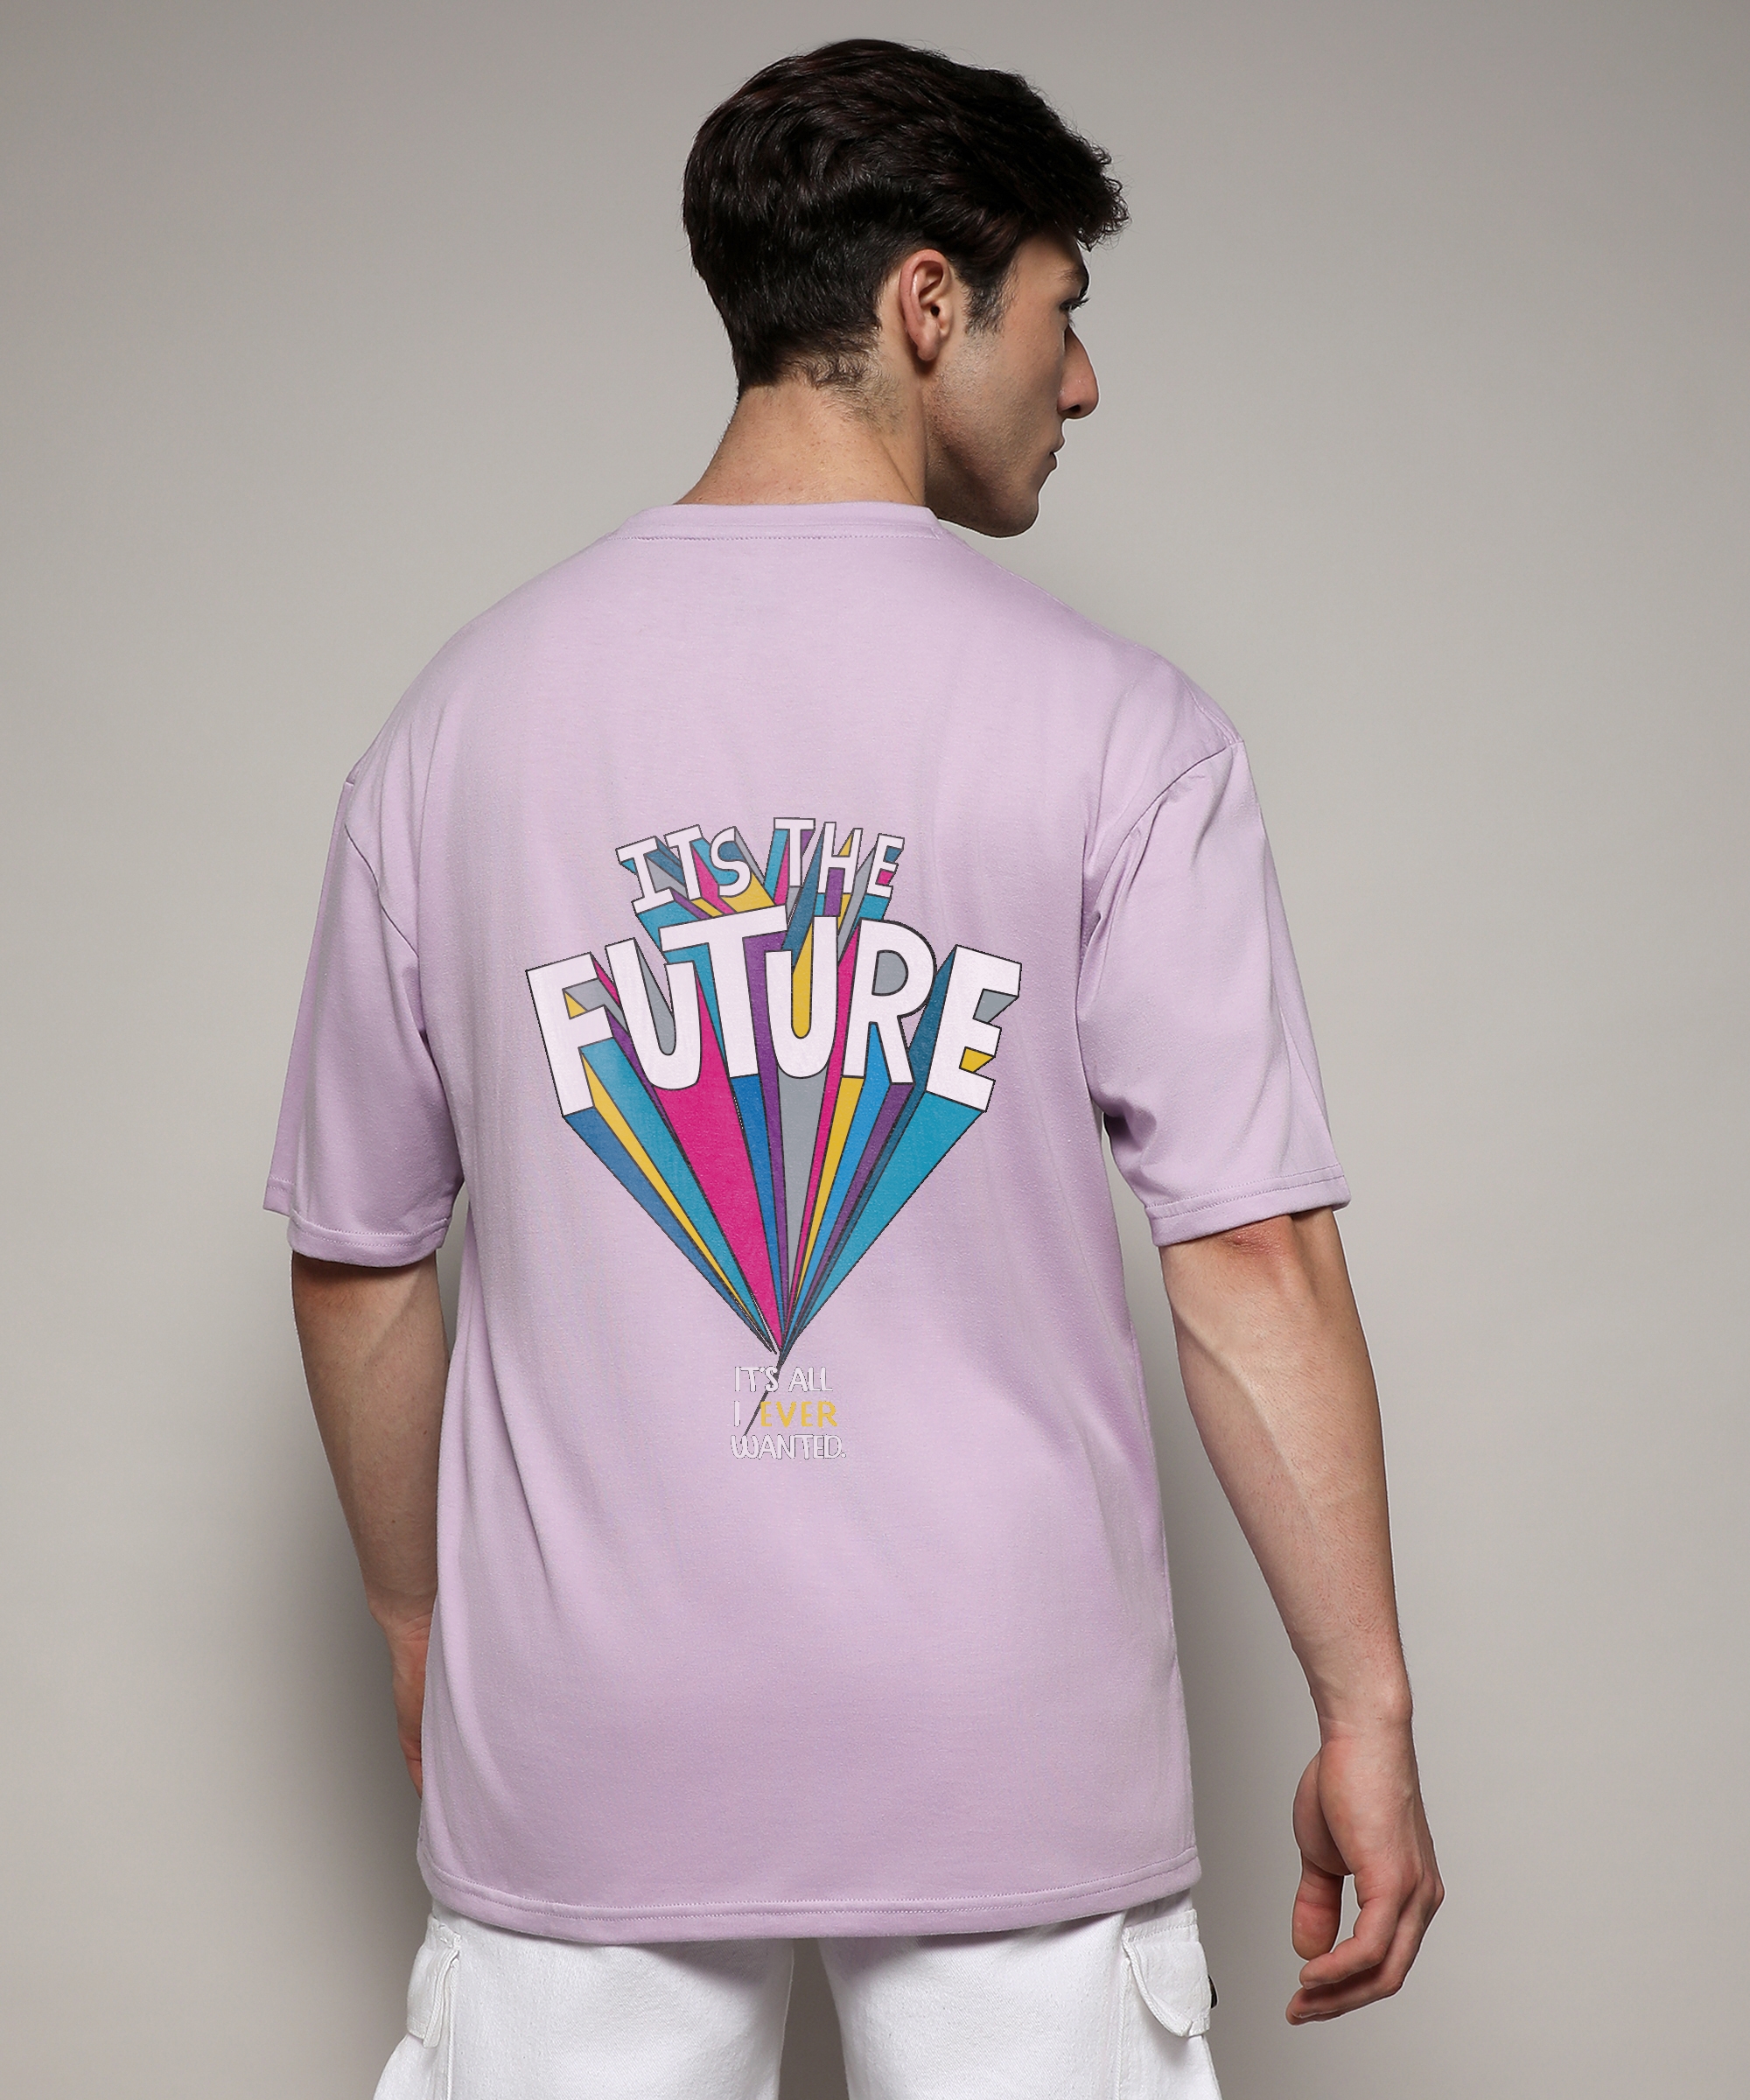 CAMPUS SUTRA | Men's Pastel Lilac Printed Oversized T-Shirt